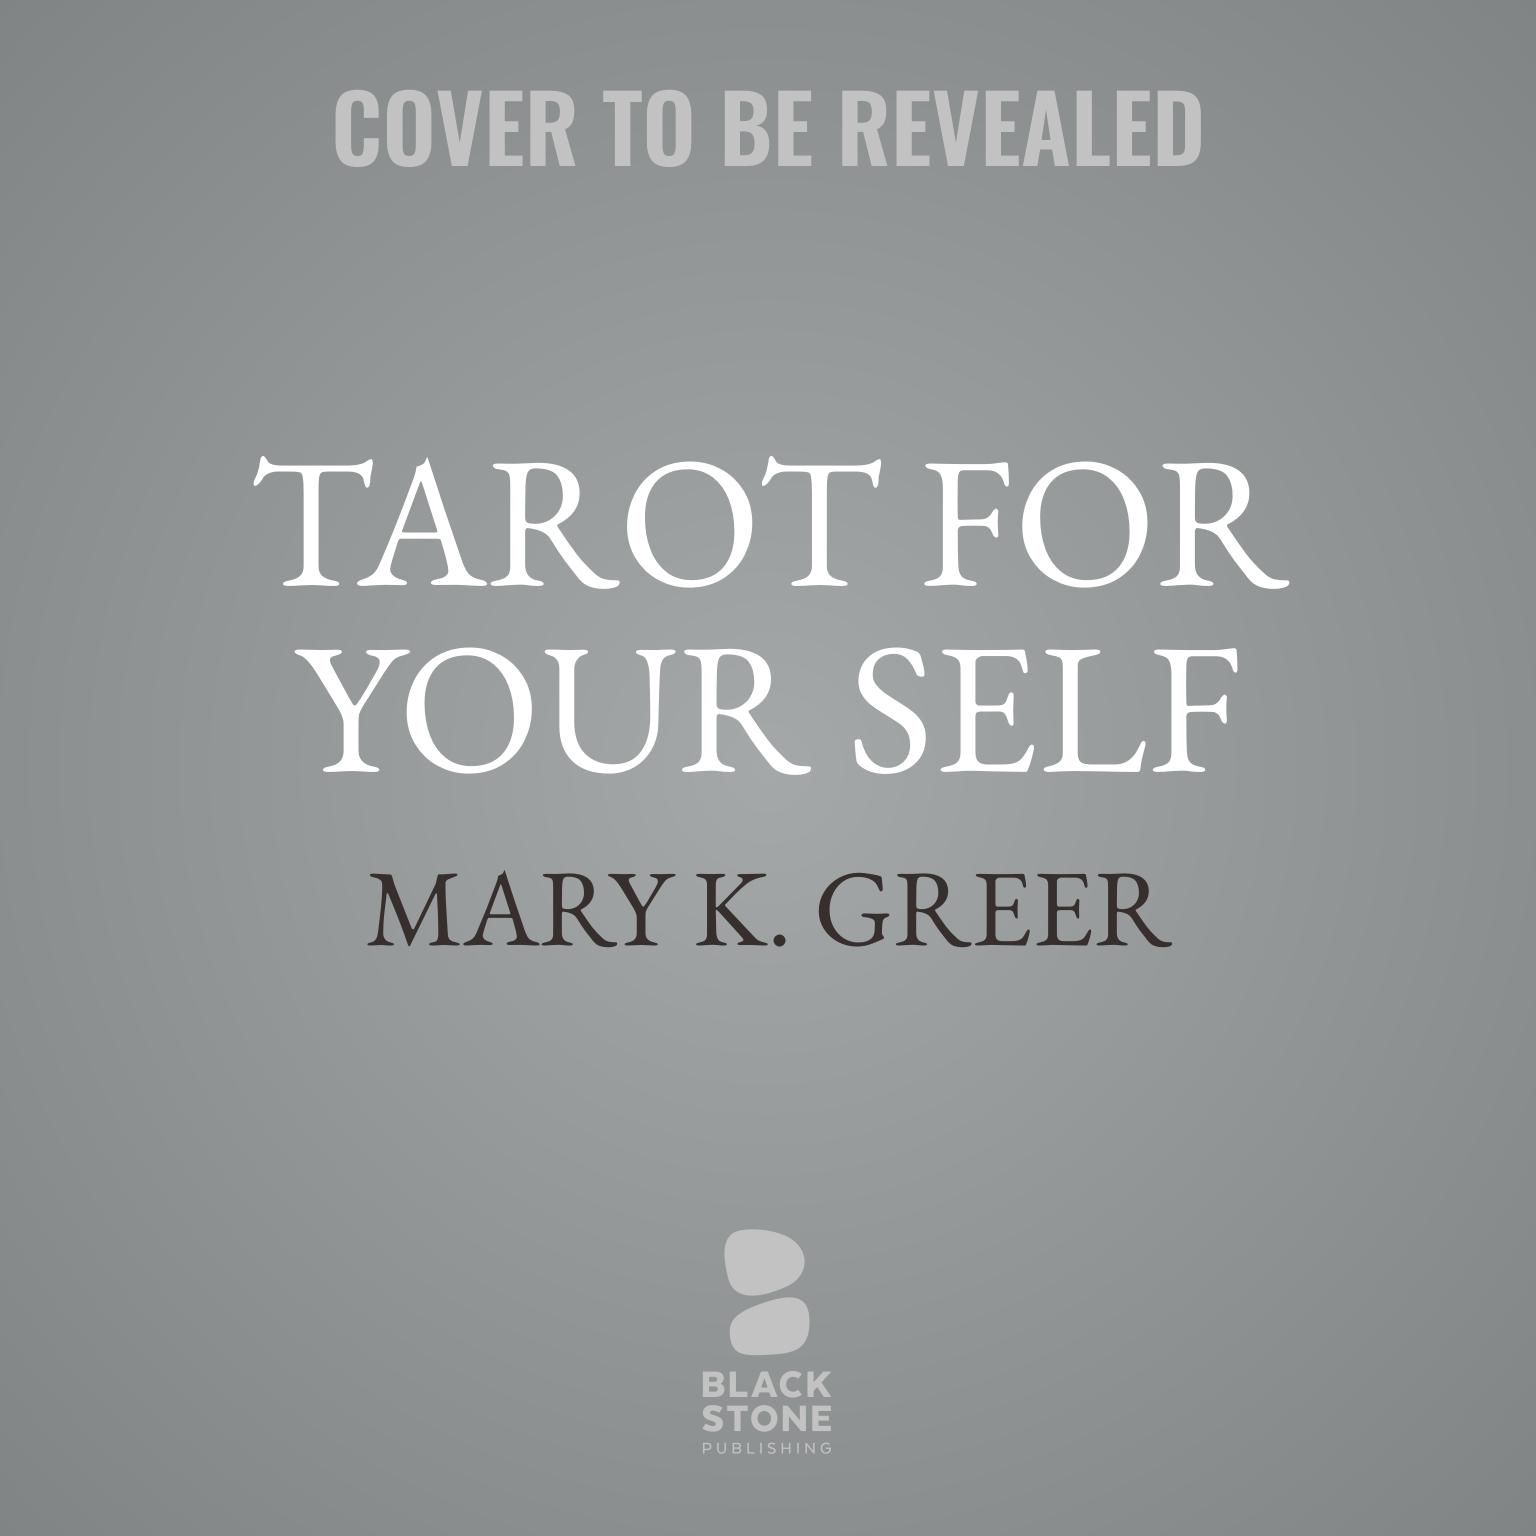 Tarot for Your Self: A Workbook for the Inward Journey (35th Anniversary Edition) Audiobook, by Mary K. Greer